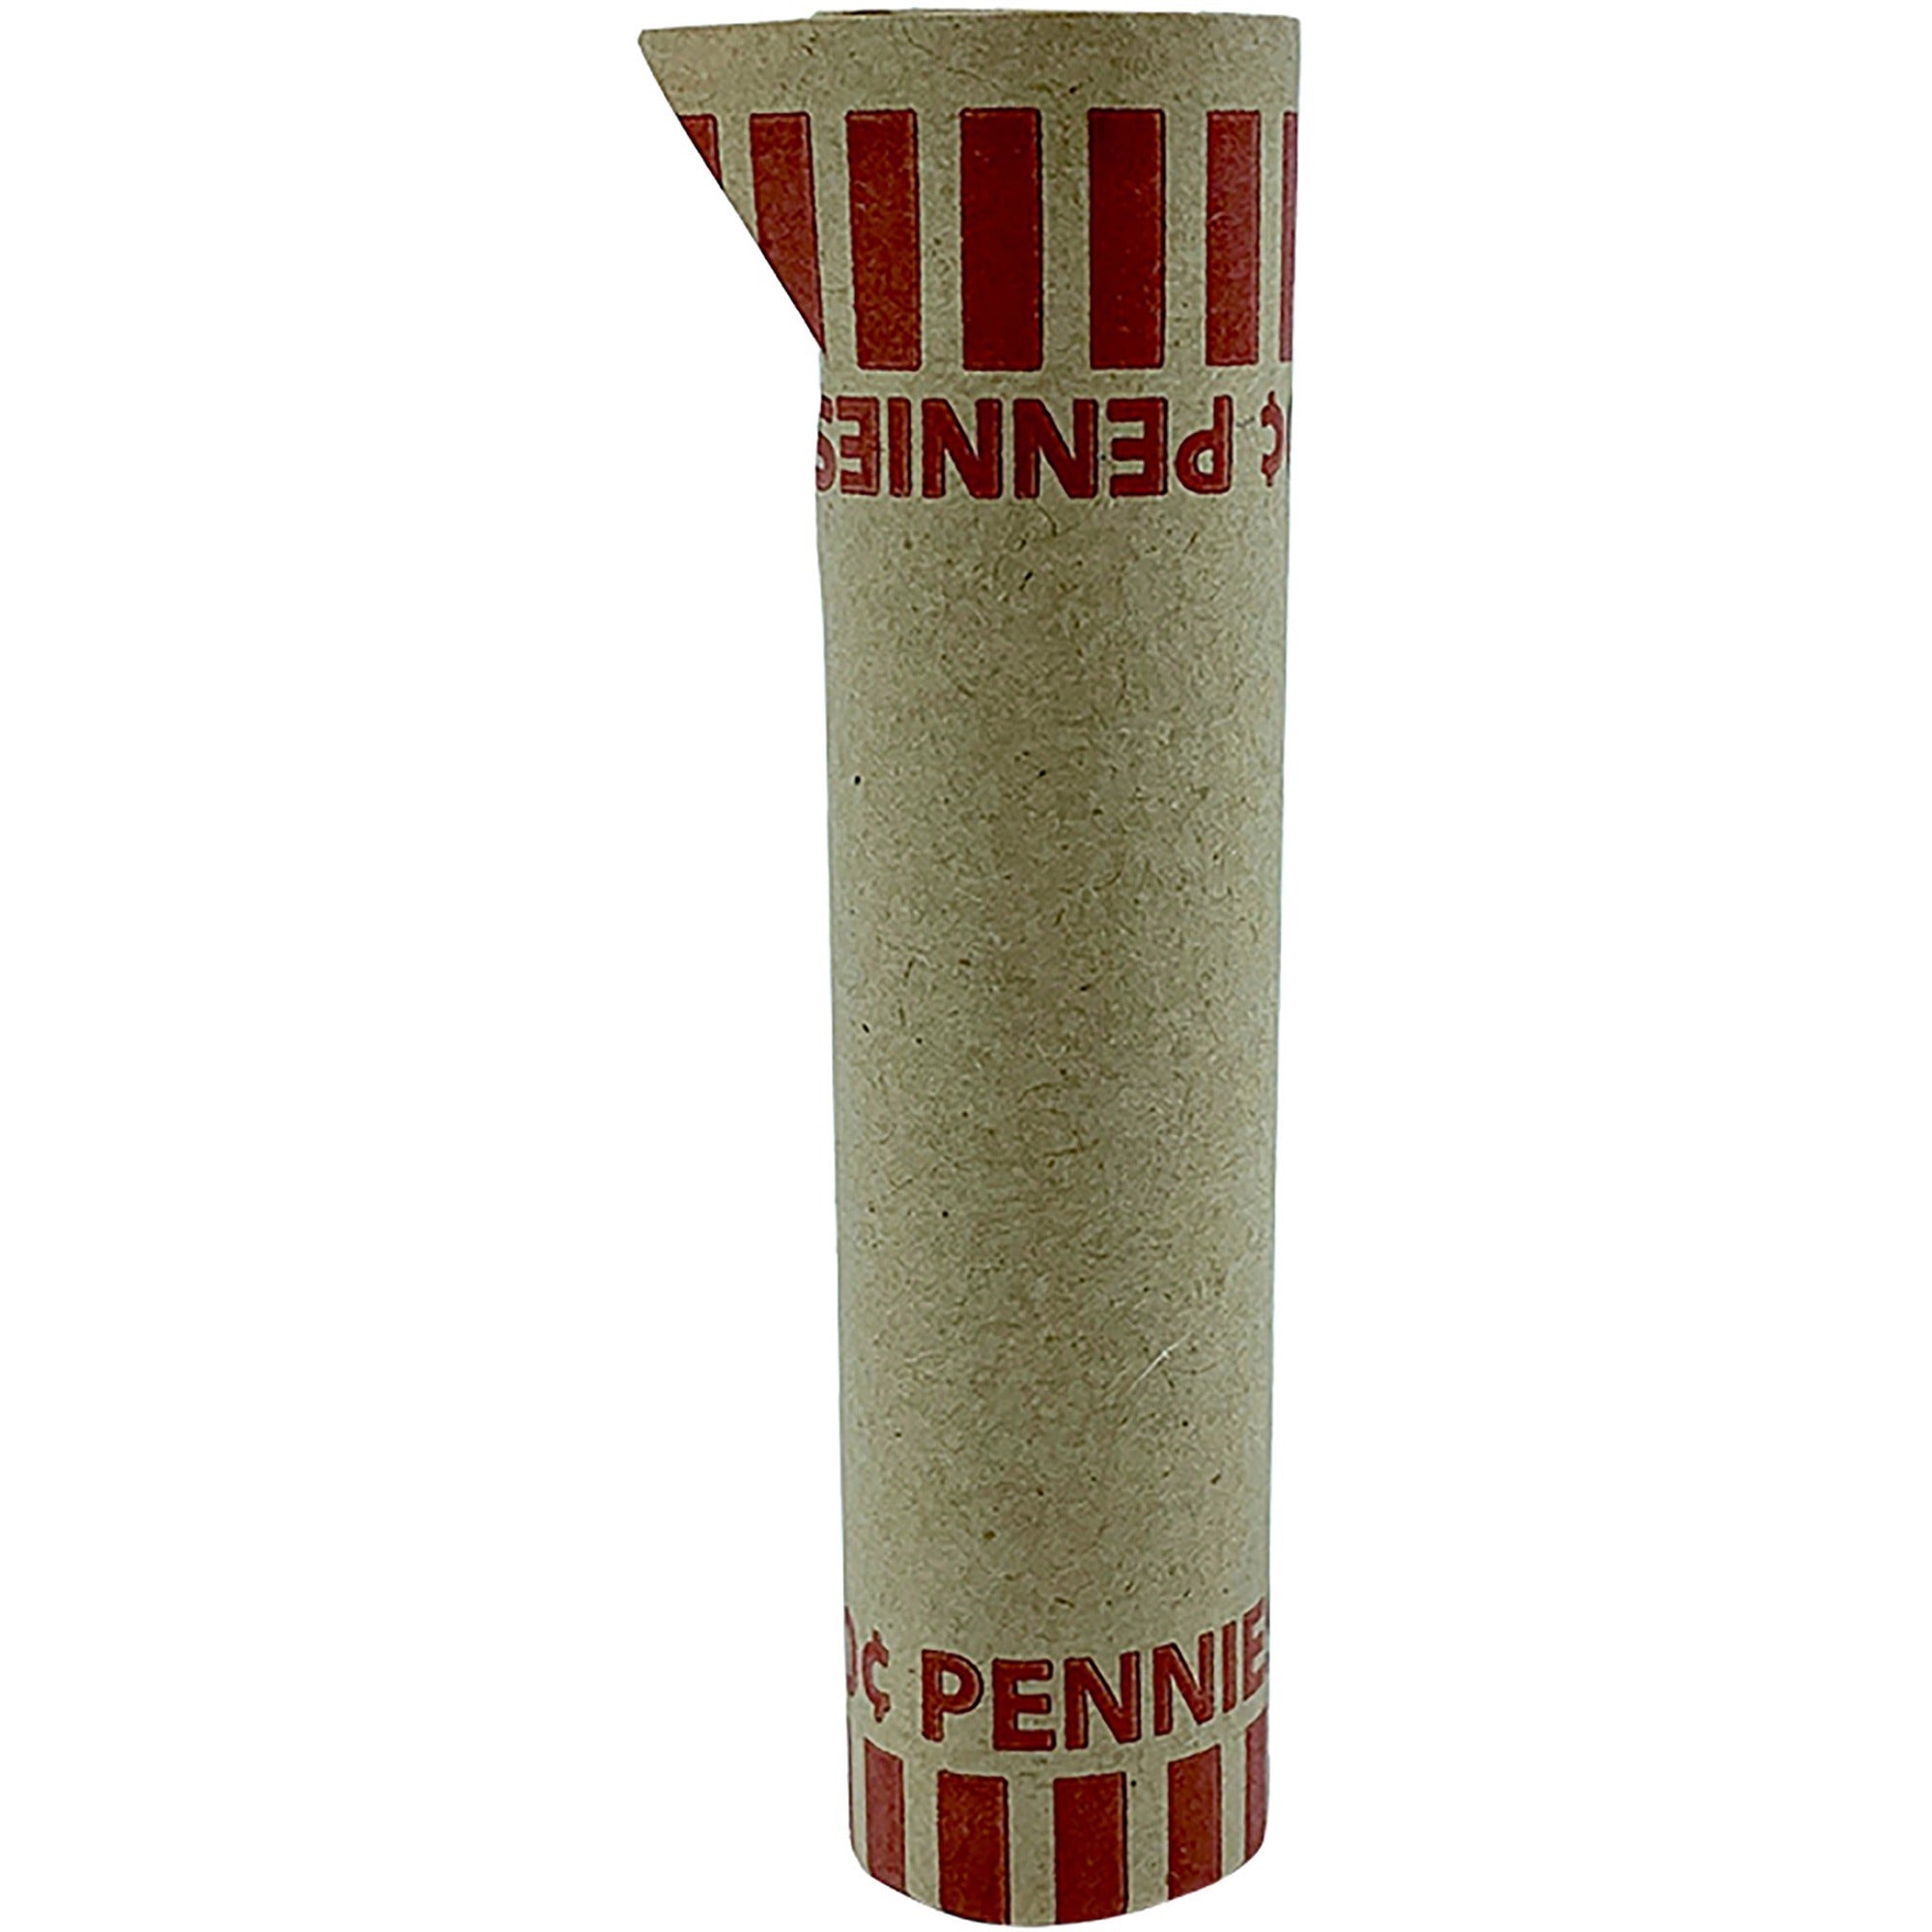 pap-r-tubular-coin-wrap-1-denomination-durable-burst-resistant-crimped-pre-formed-57-lb-basis-weight-paper-red-1000-box_pqp23001 - 1